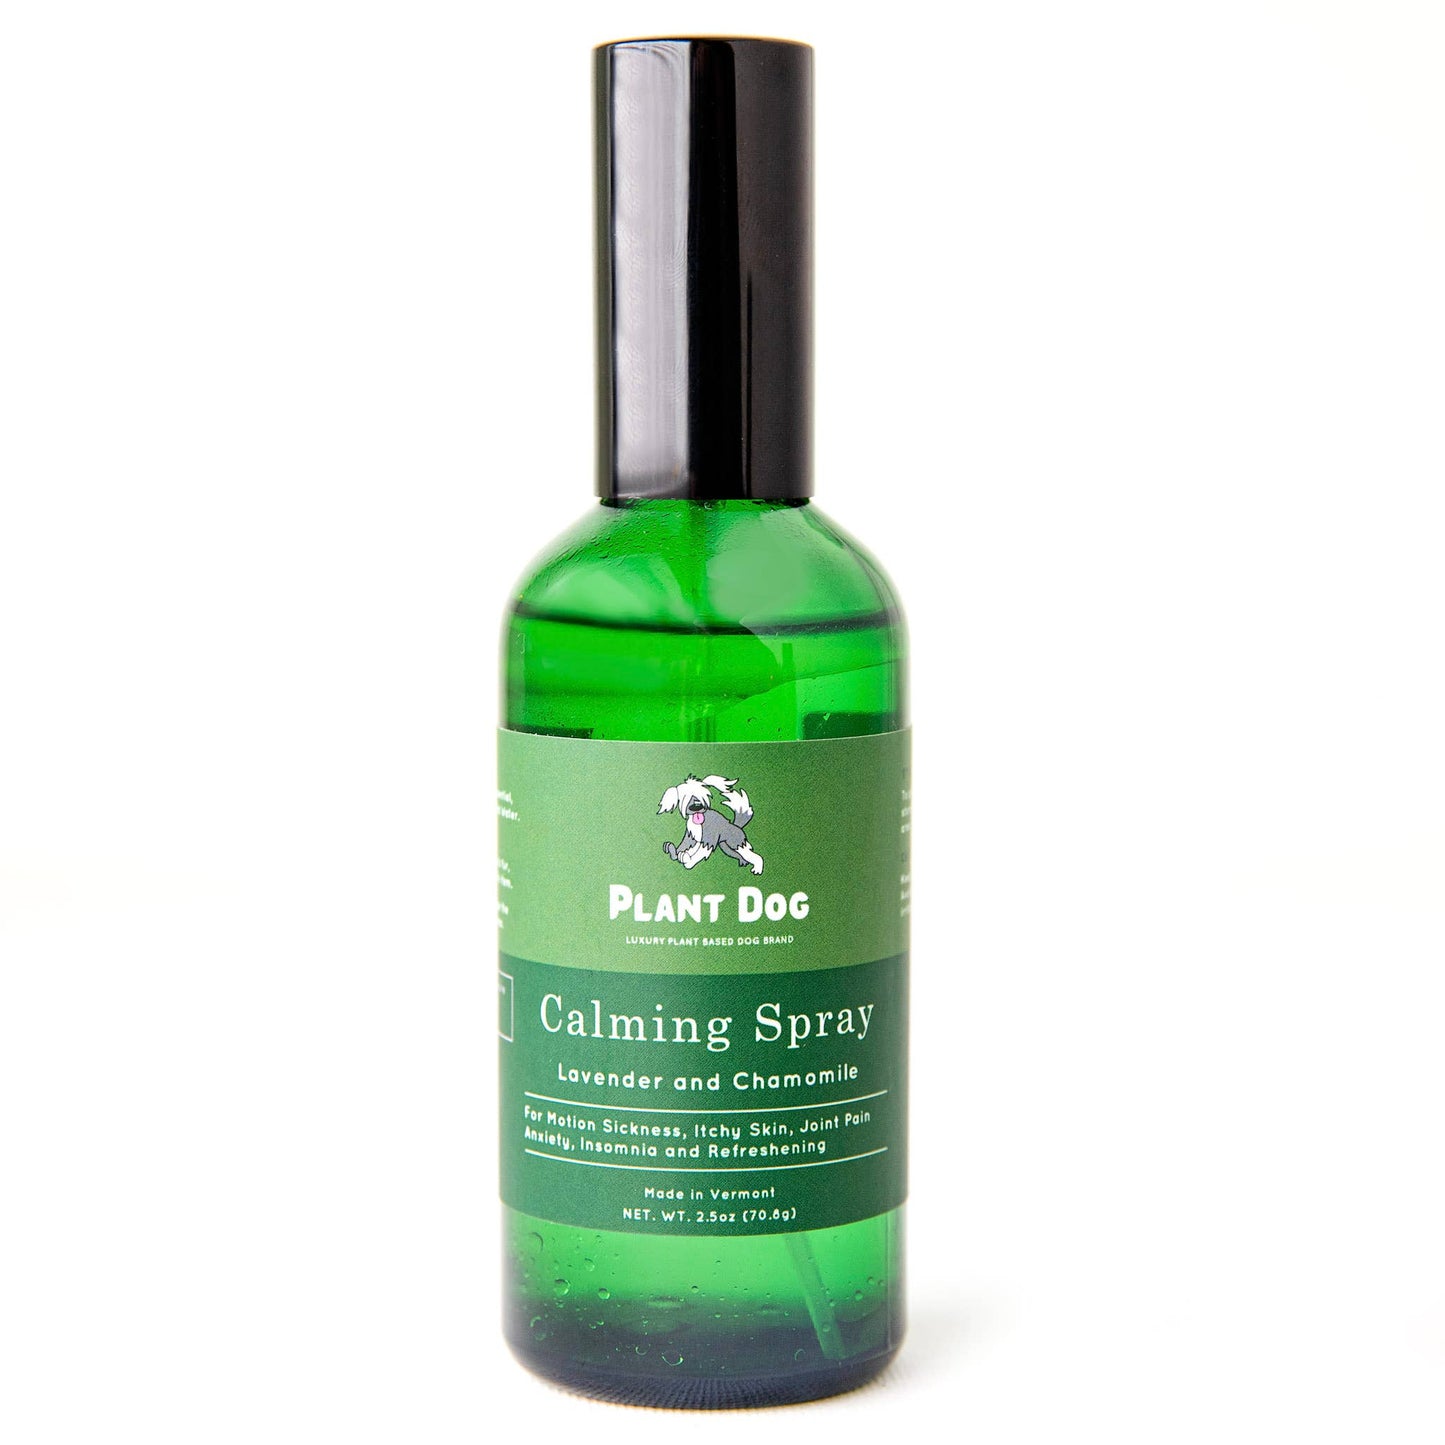 Plant Dog - Calming Spray with Lavender and Chamomile